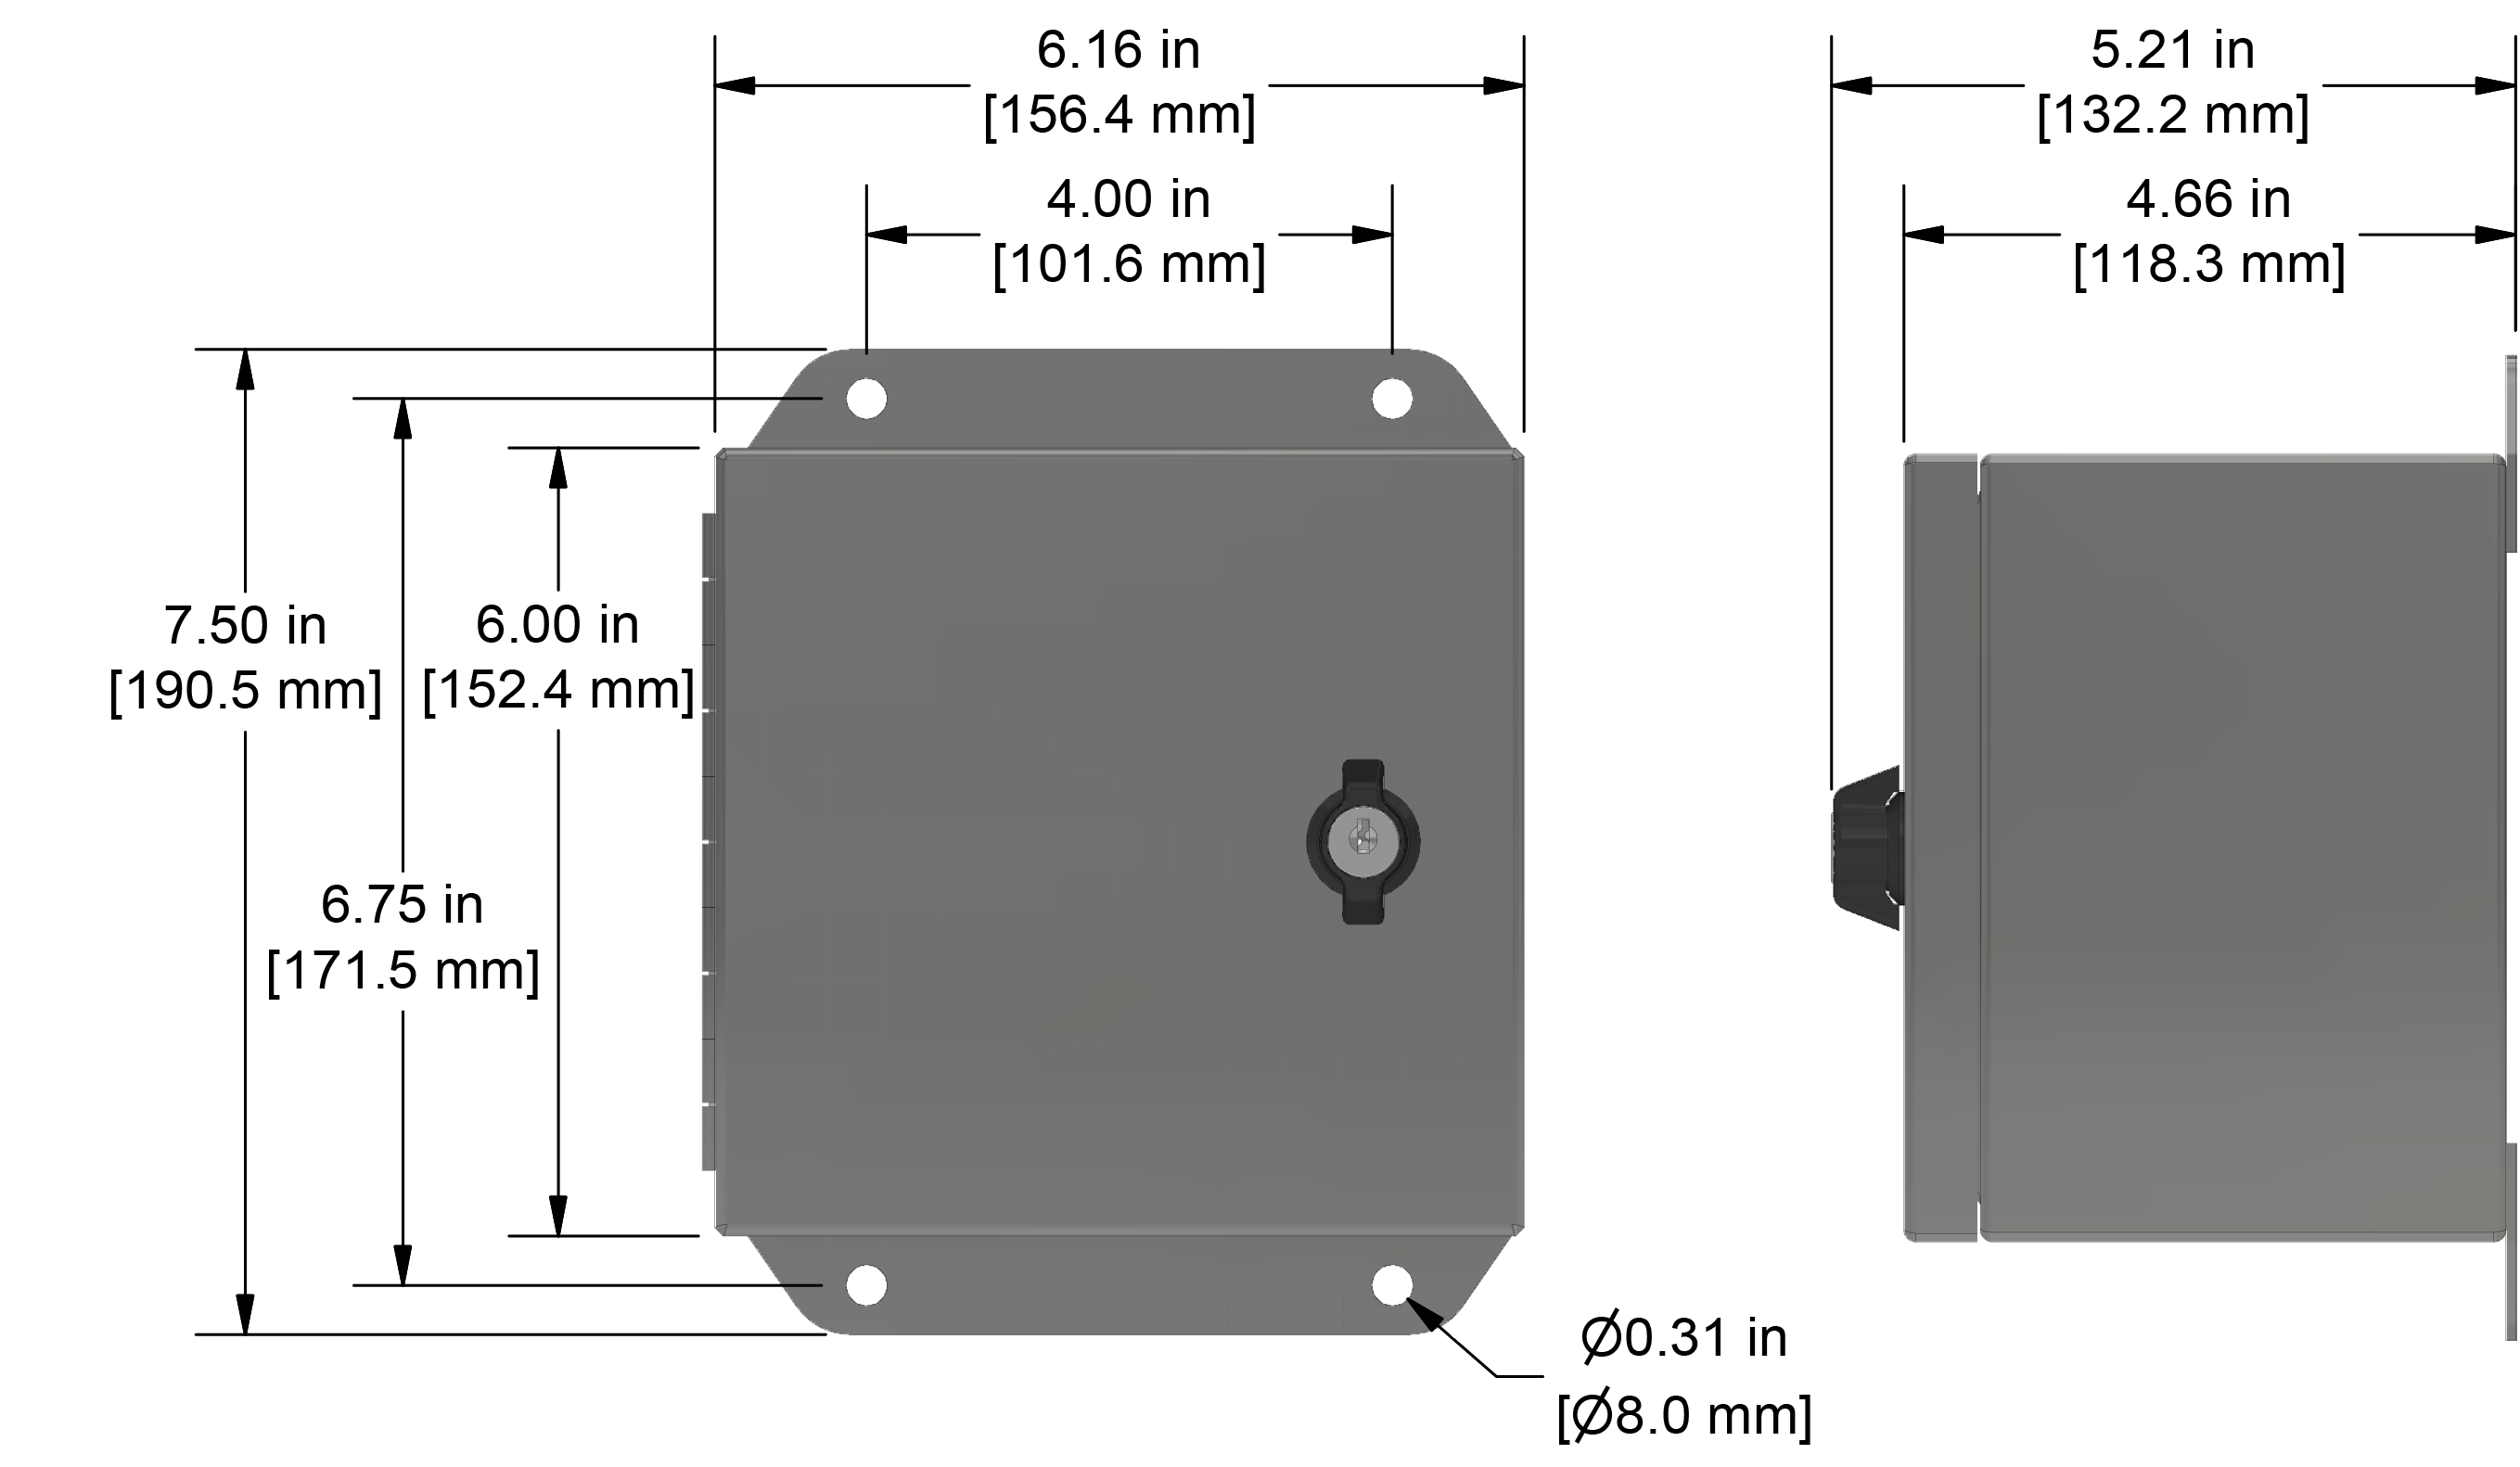 A drawing showing the dimensions of a CTC MX202 industrial enclosure.